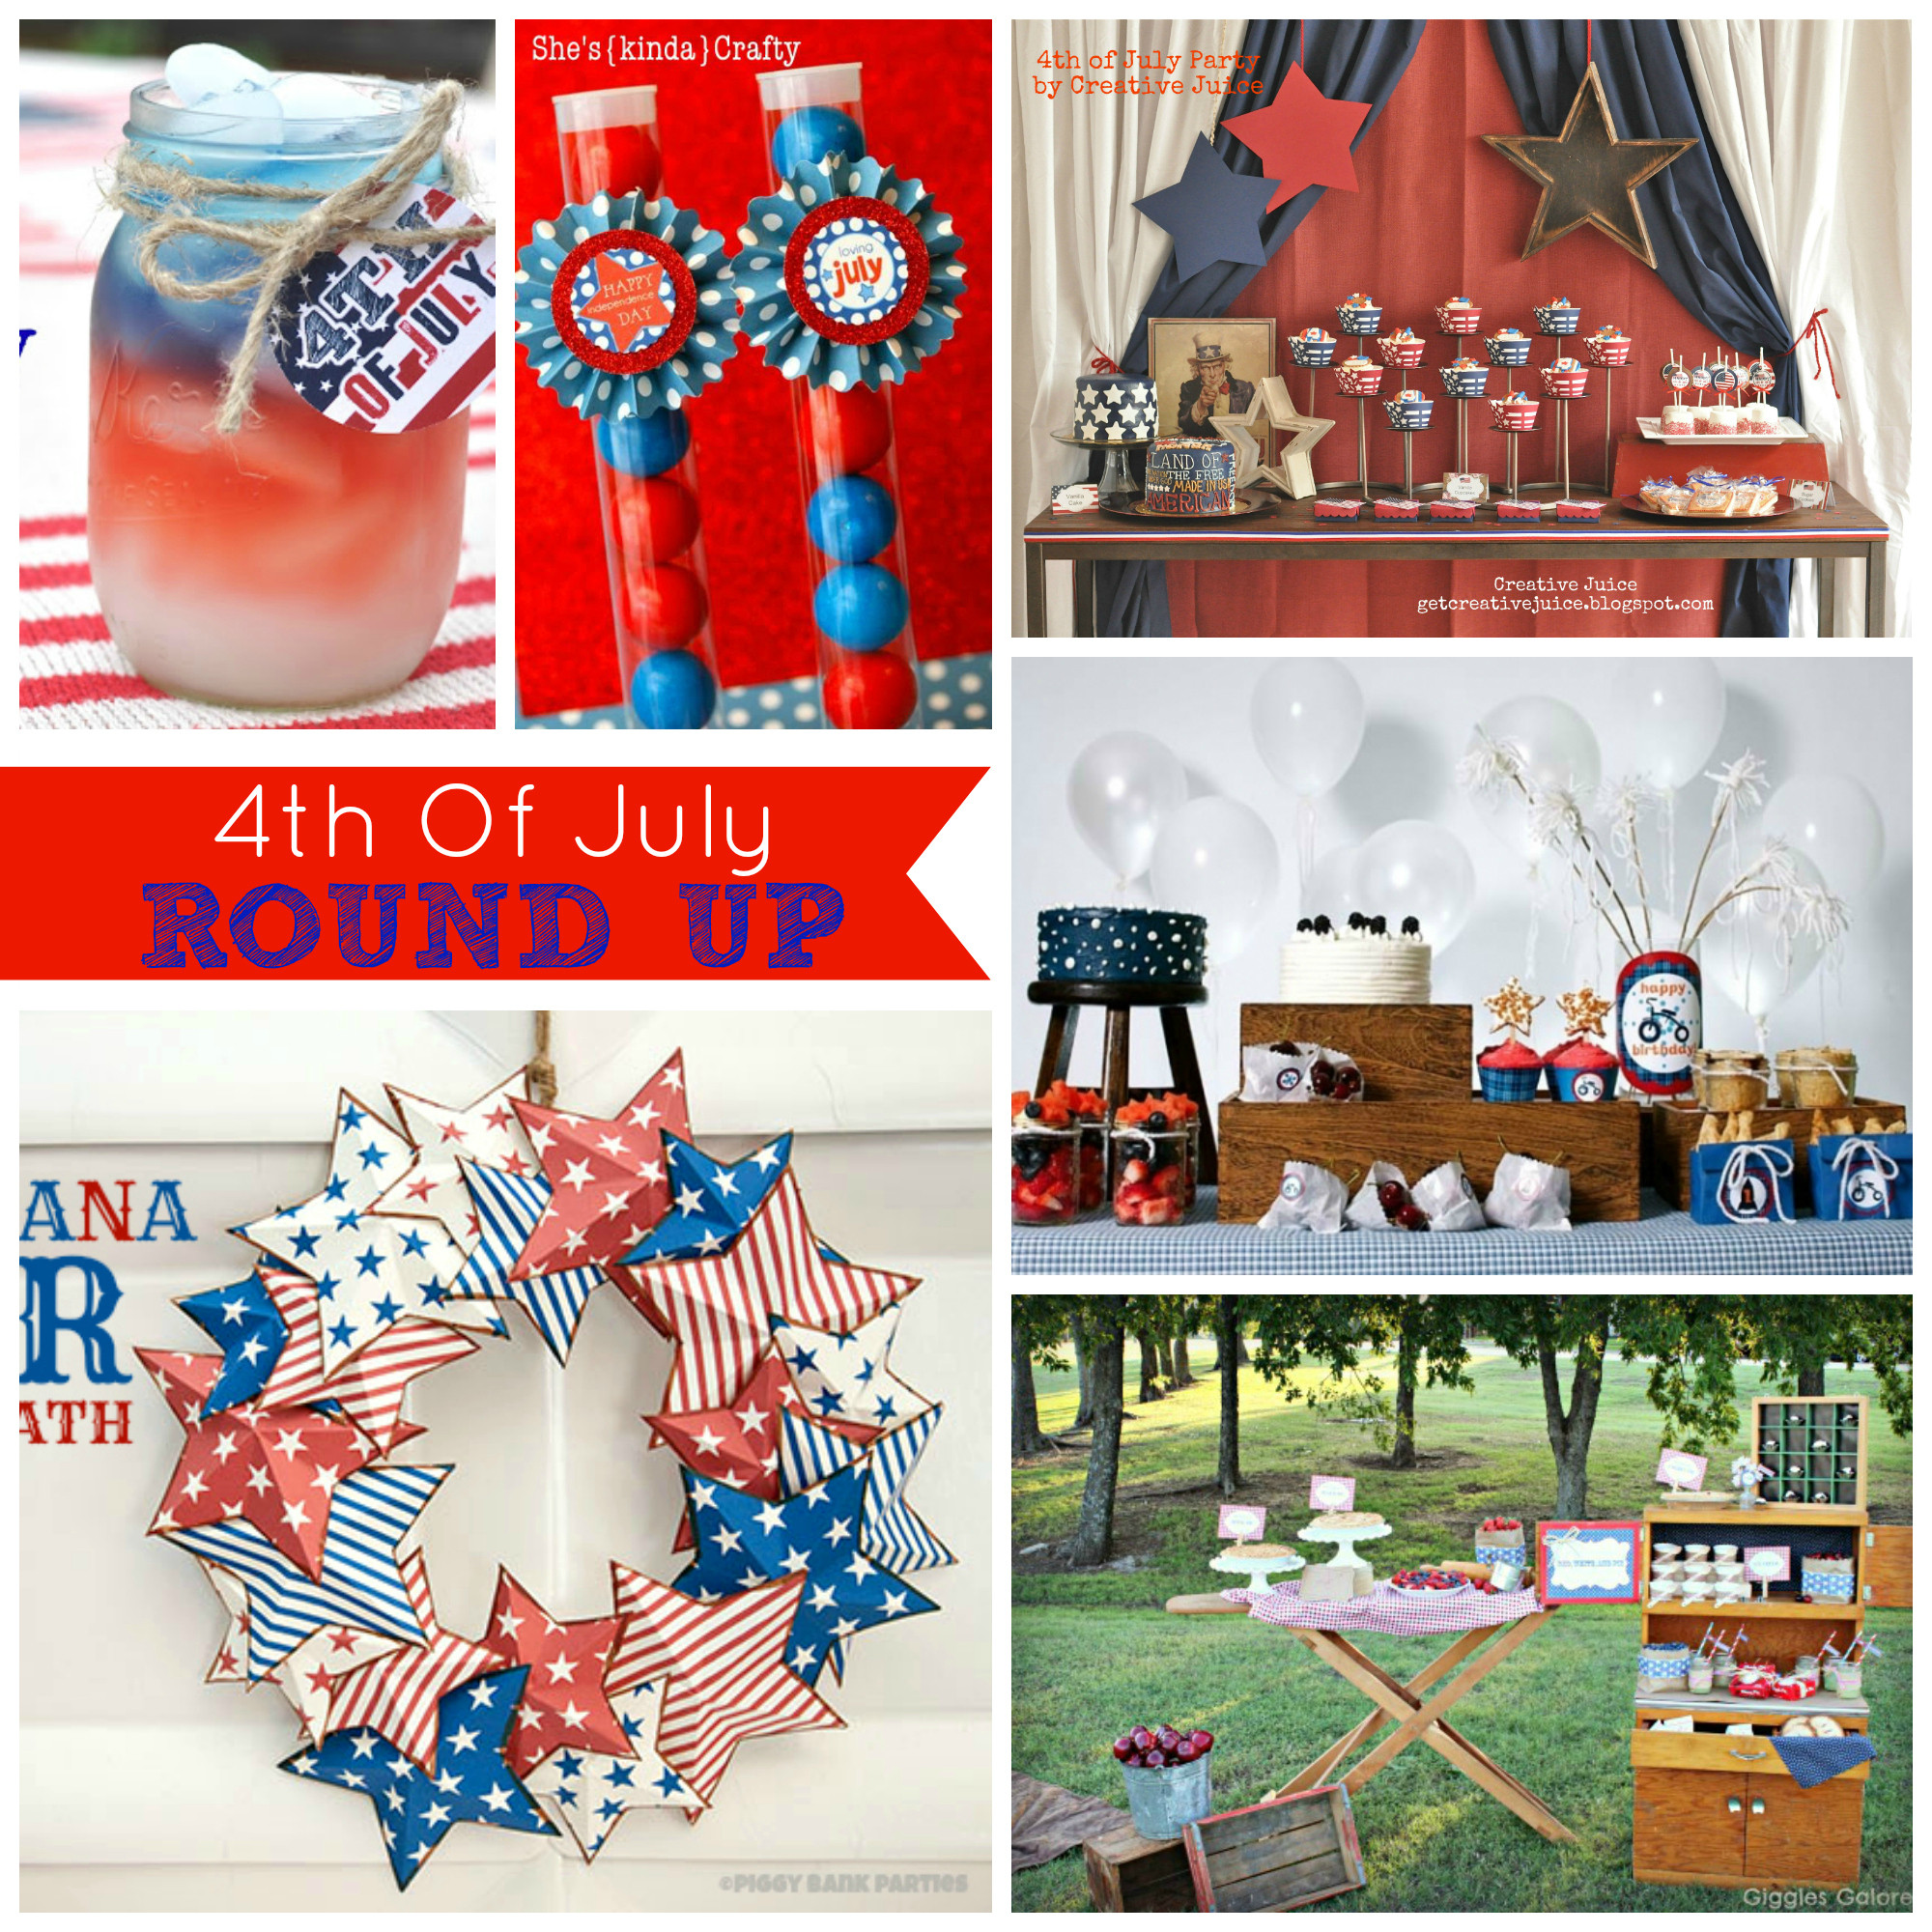 Christmas In July Party Ideas For Adults
 ROUND UP 4th of july party ideas Creative Juice